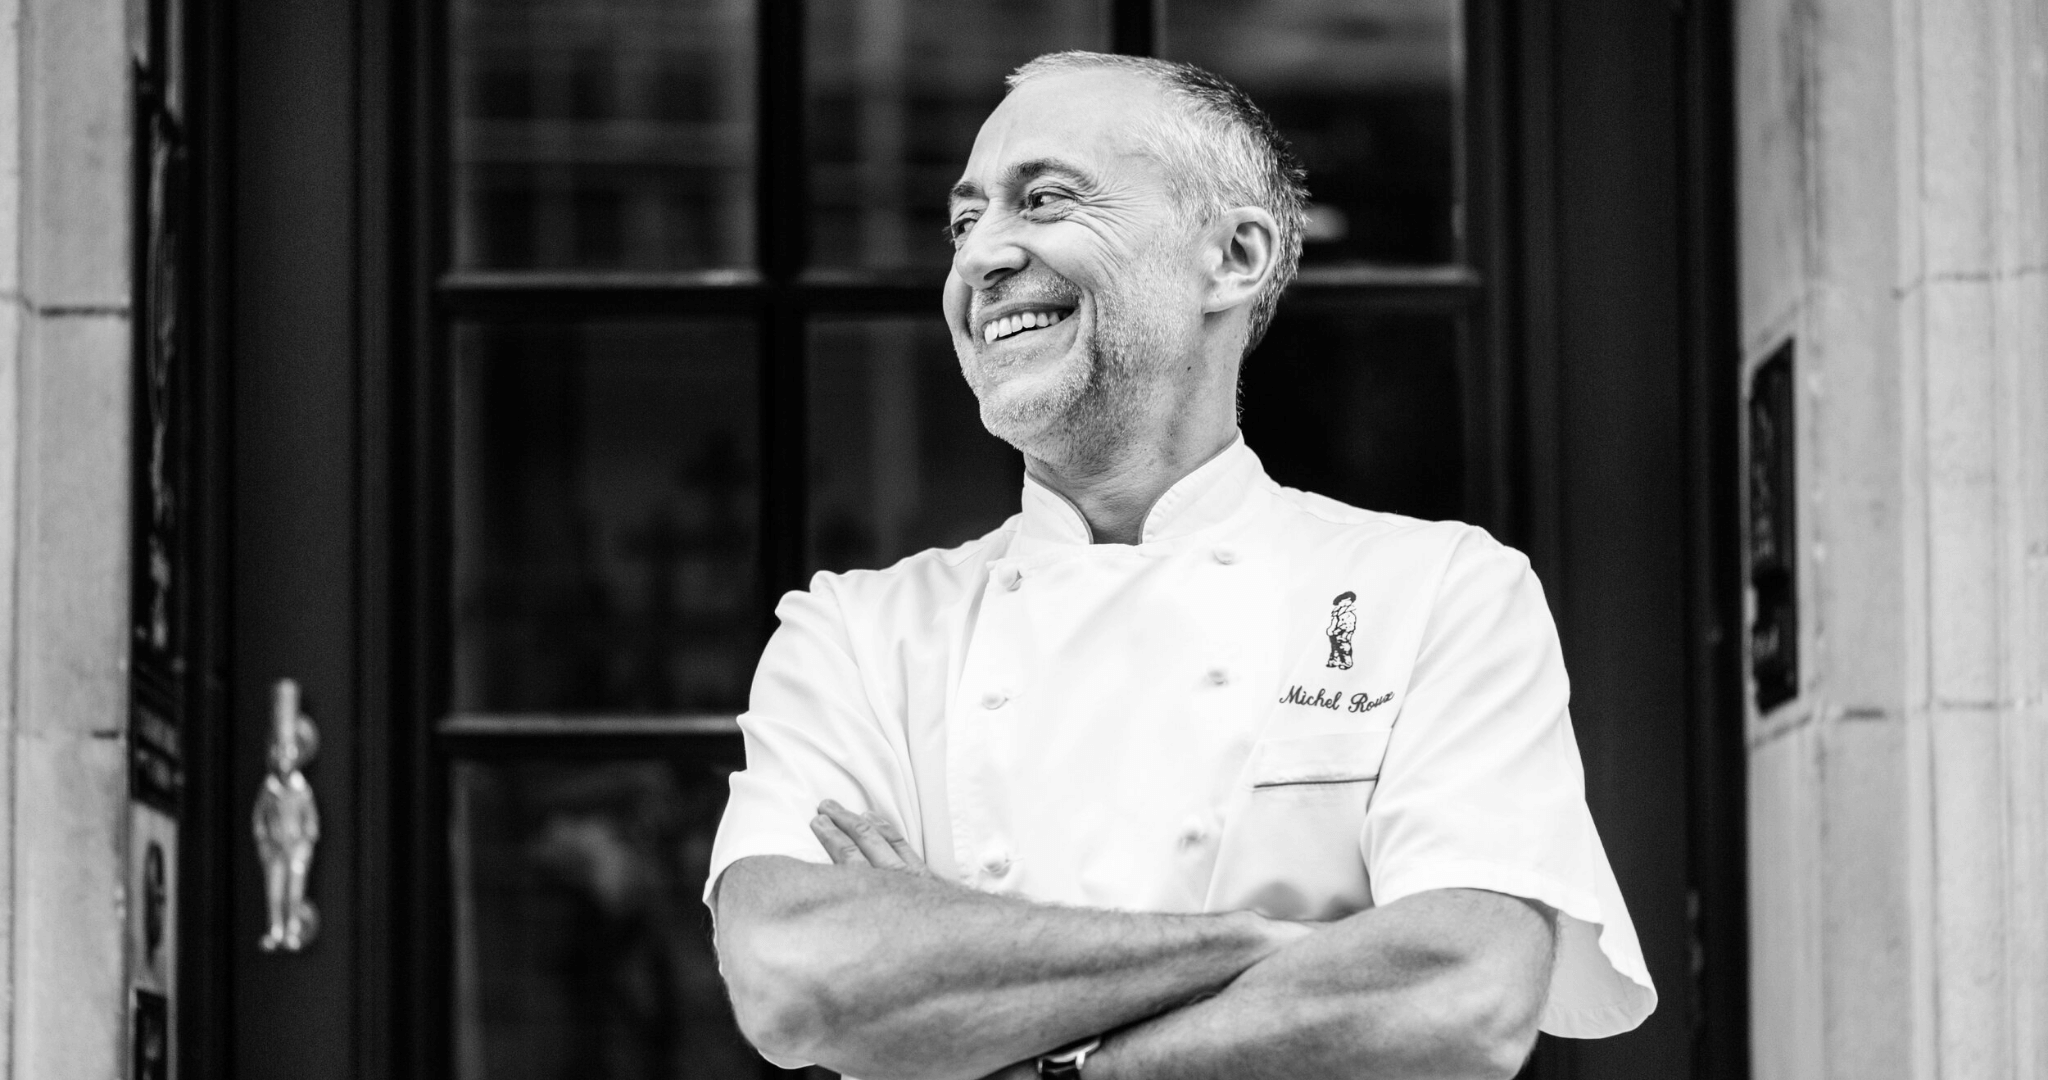 Black and white photo of Michel roux